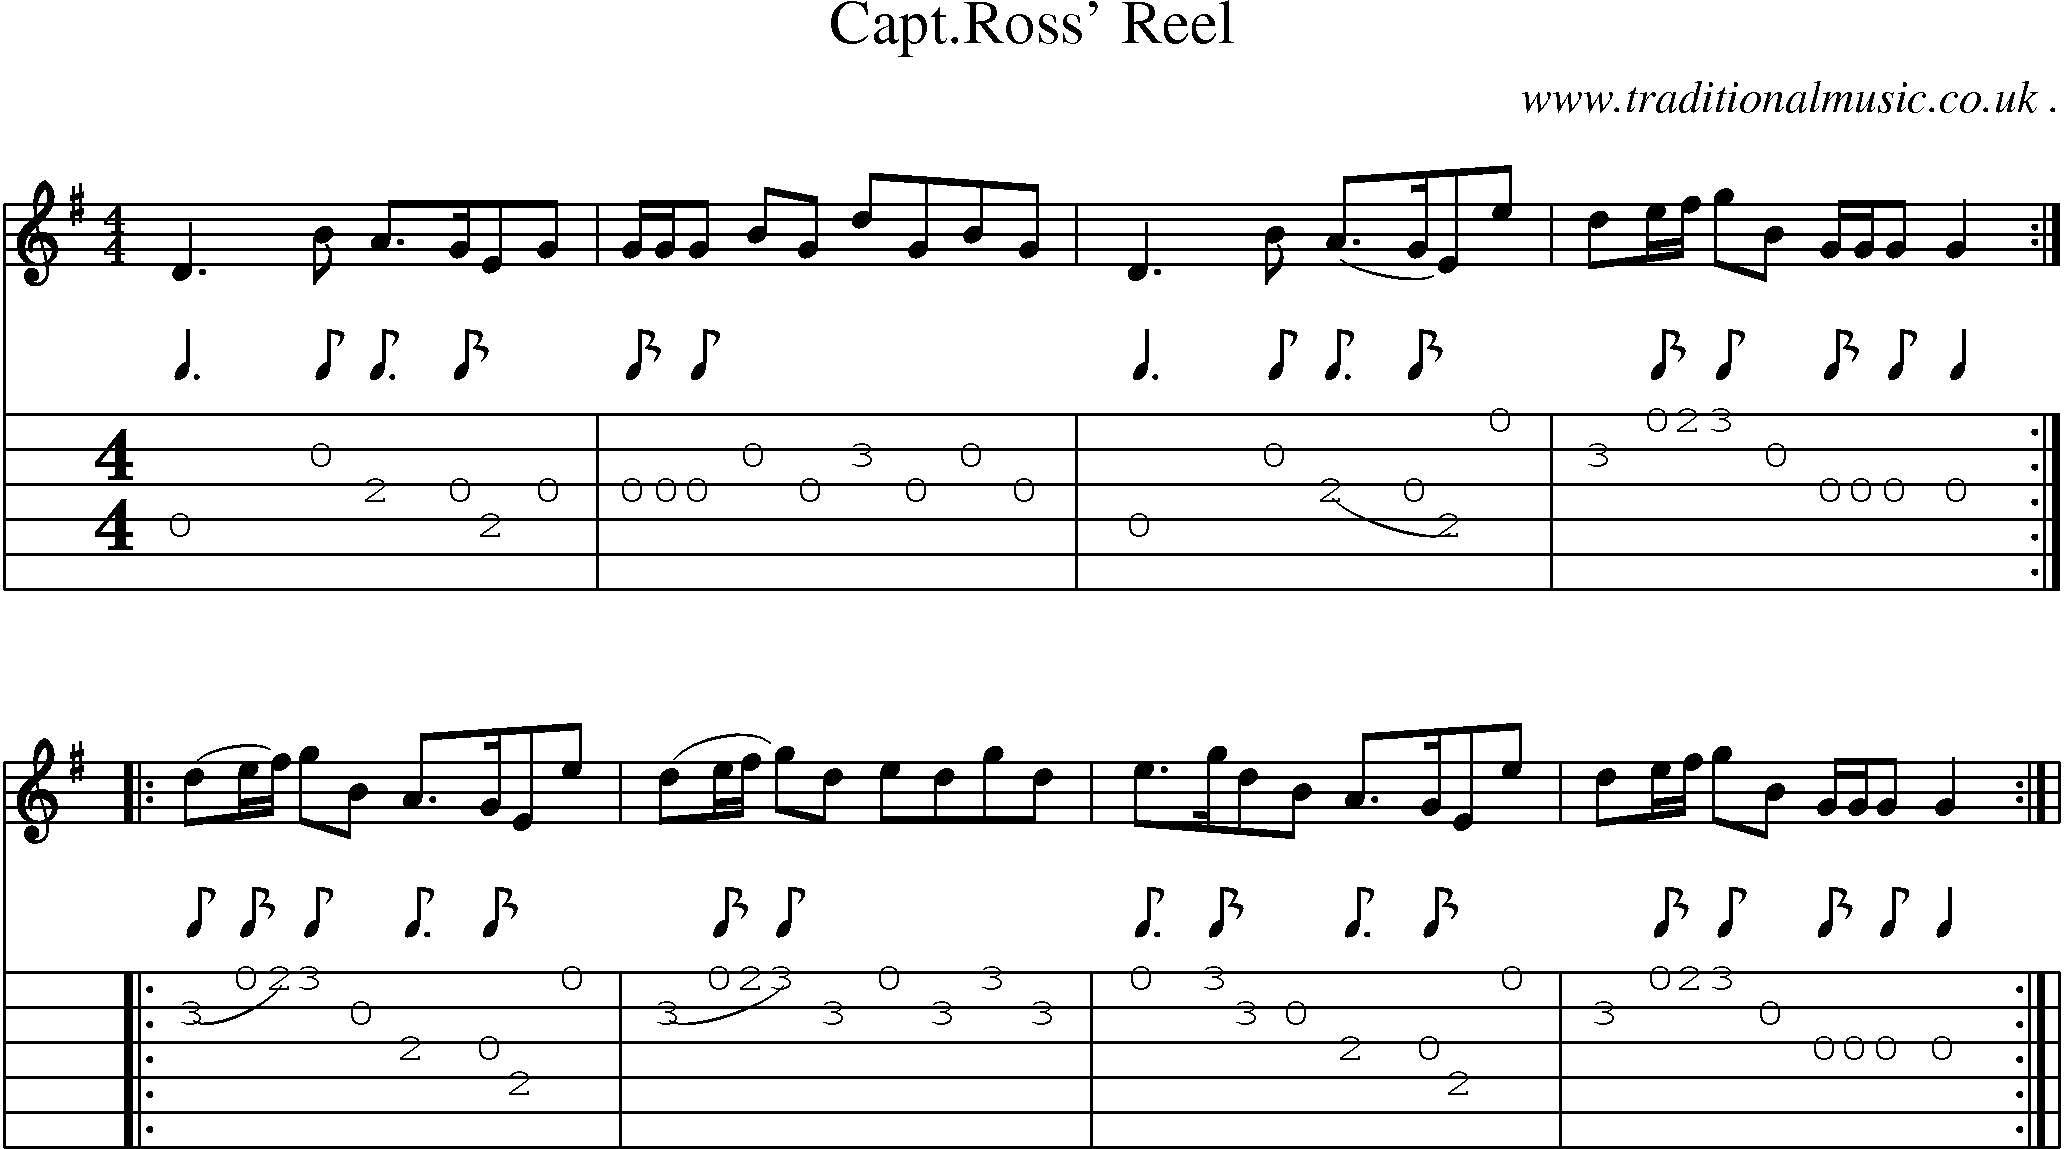 Sheet-Music and Guitar Tabs for Captross Reel